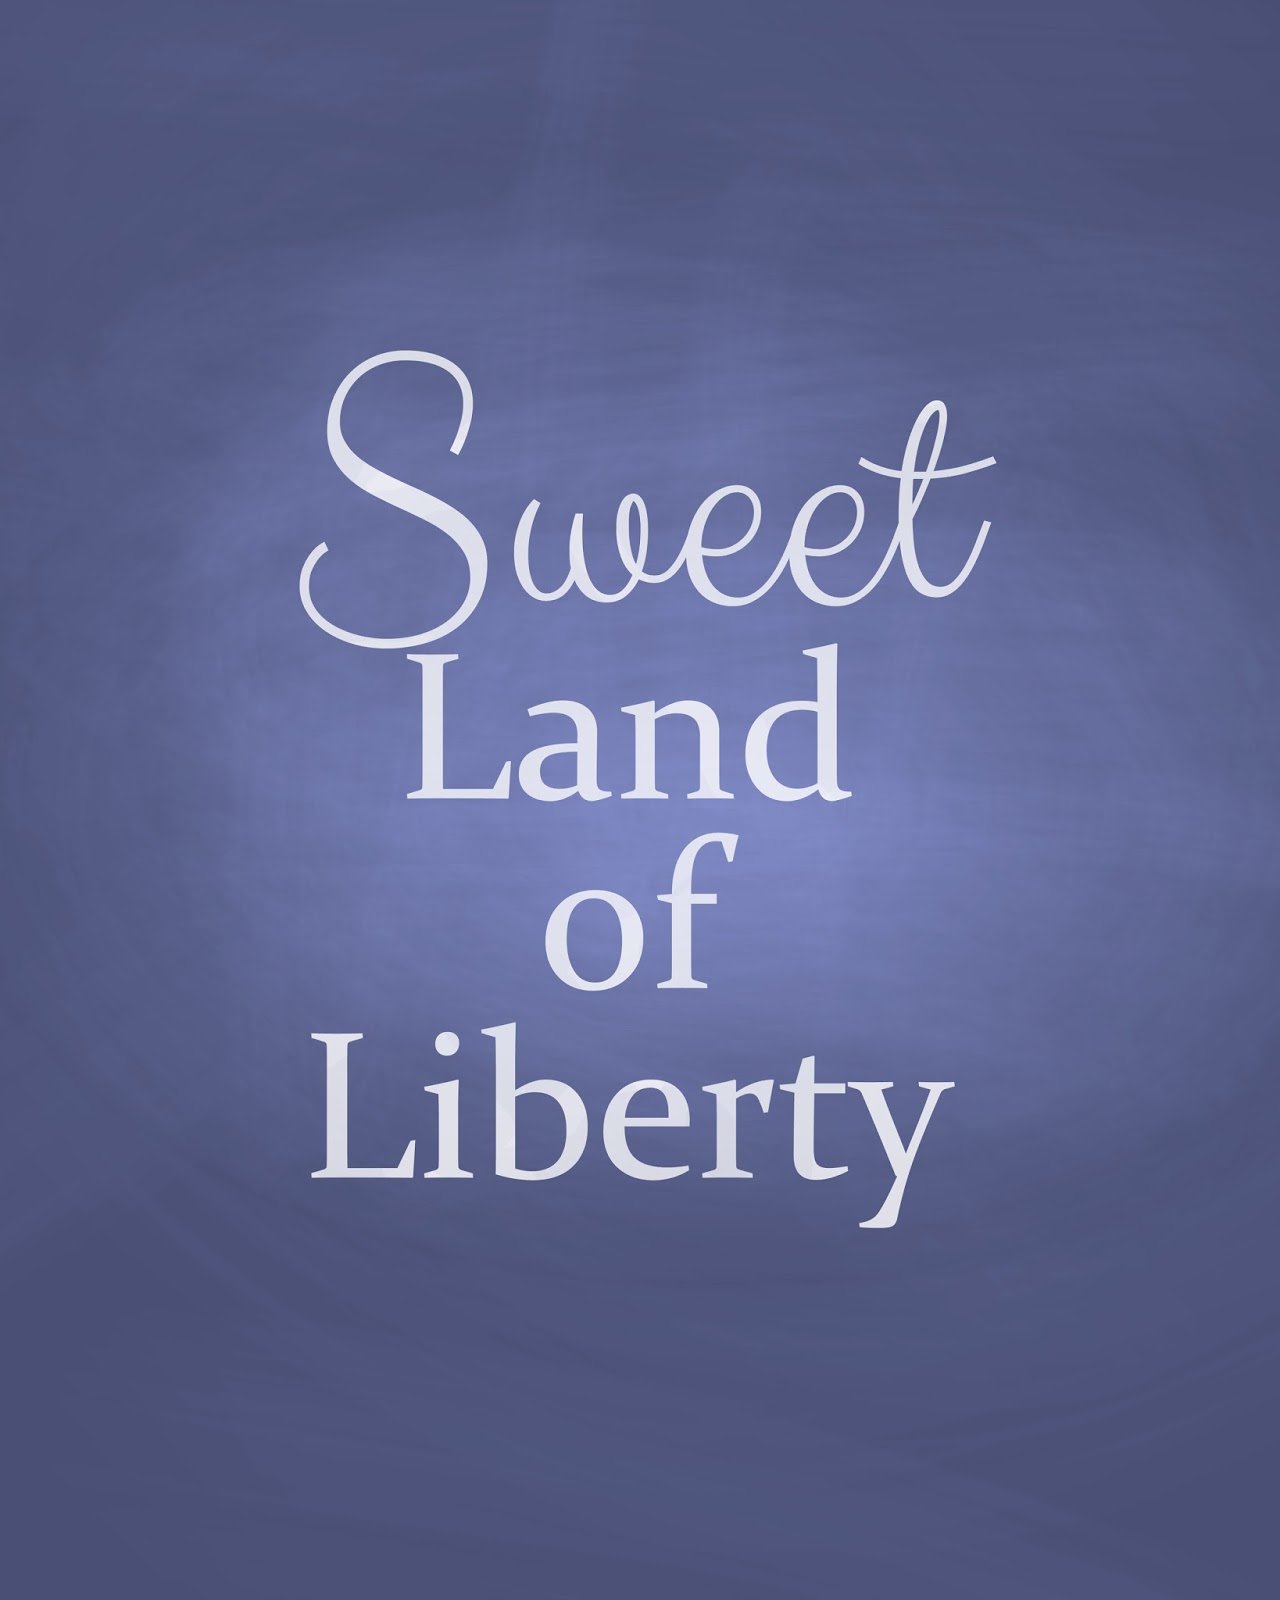 sweet+land+of+liberty+printable | 15 Patriotic Projects | 35 |